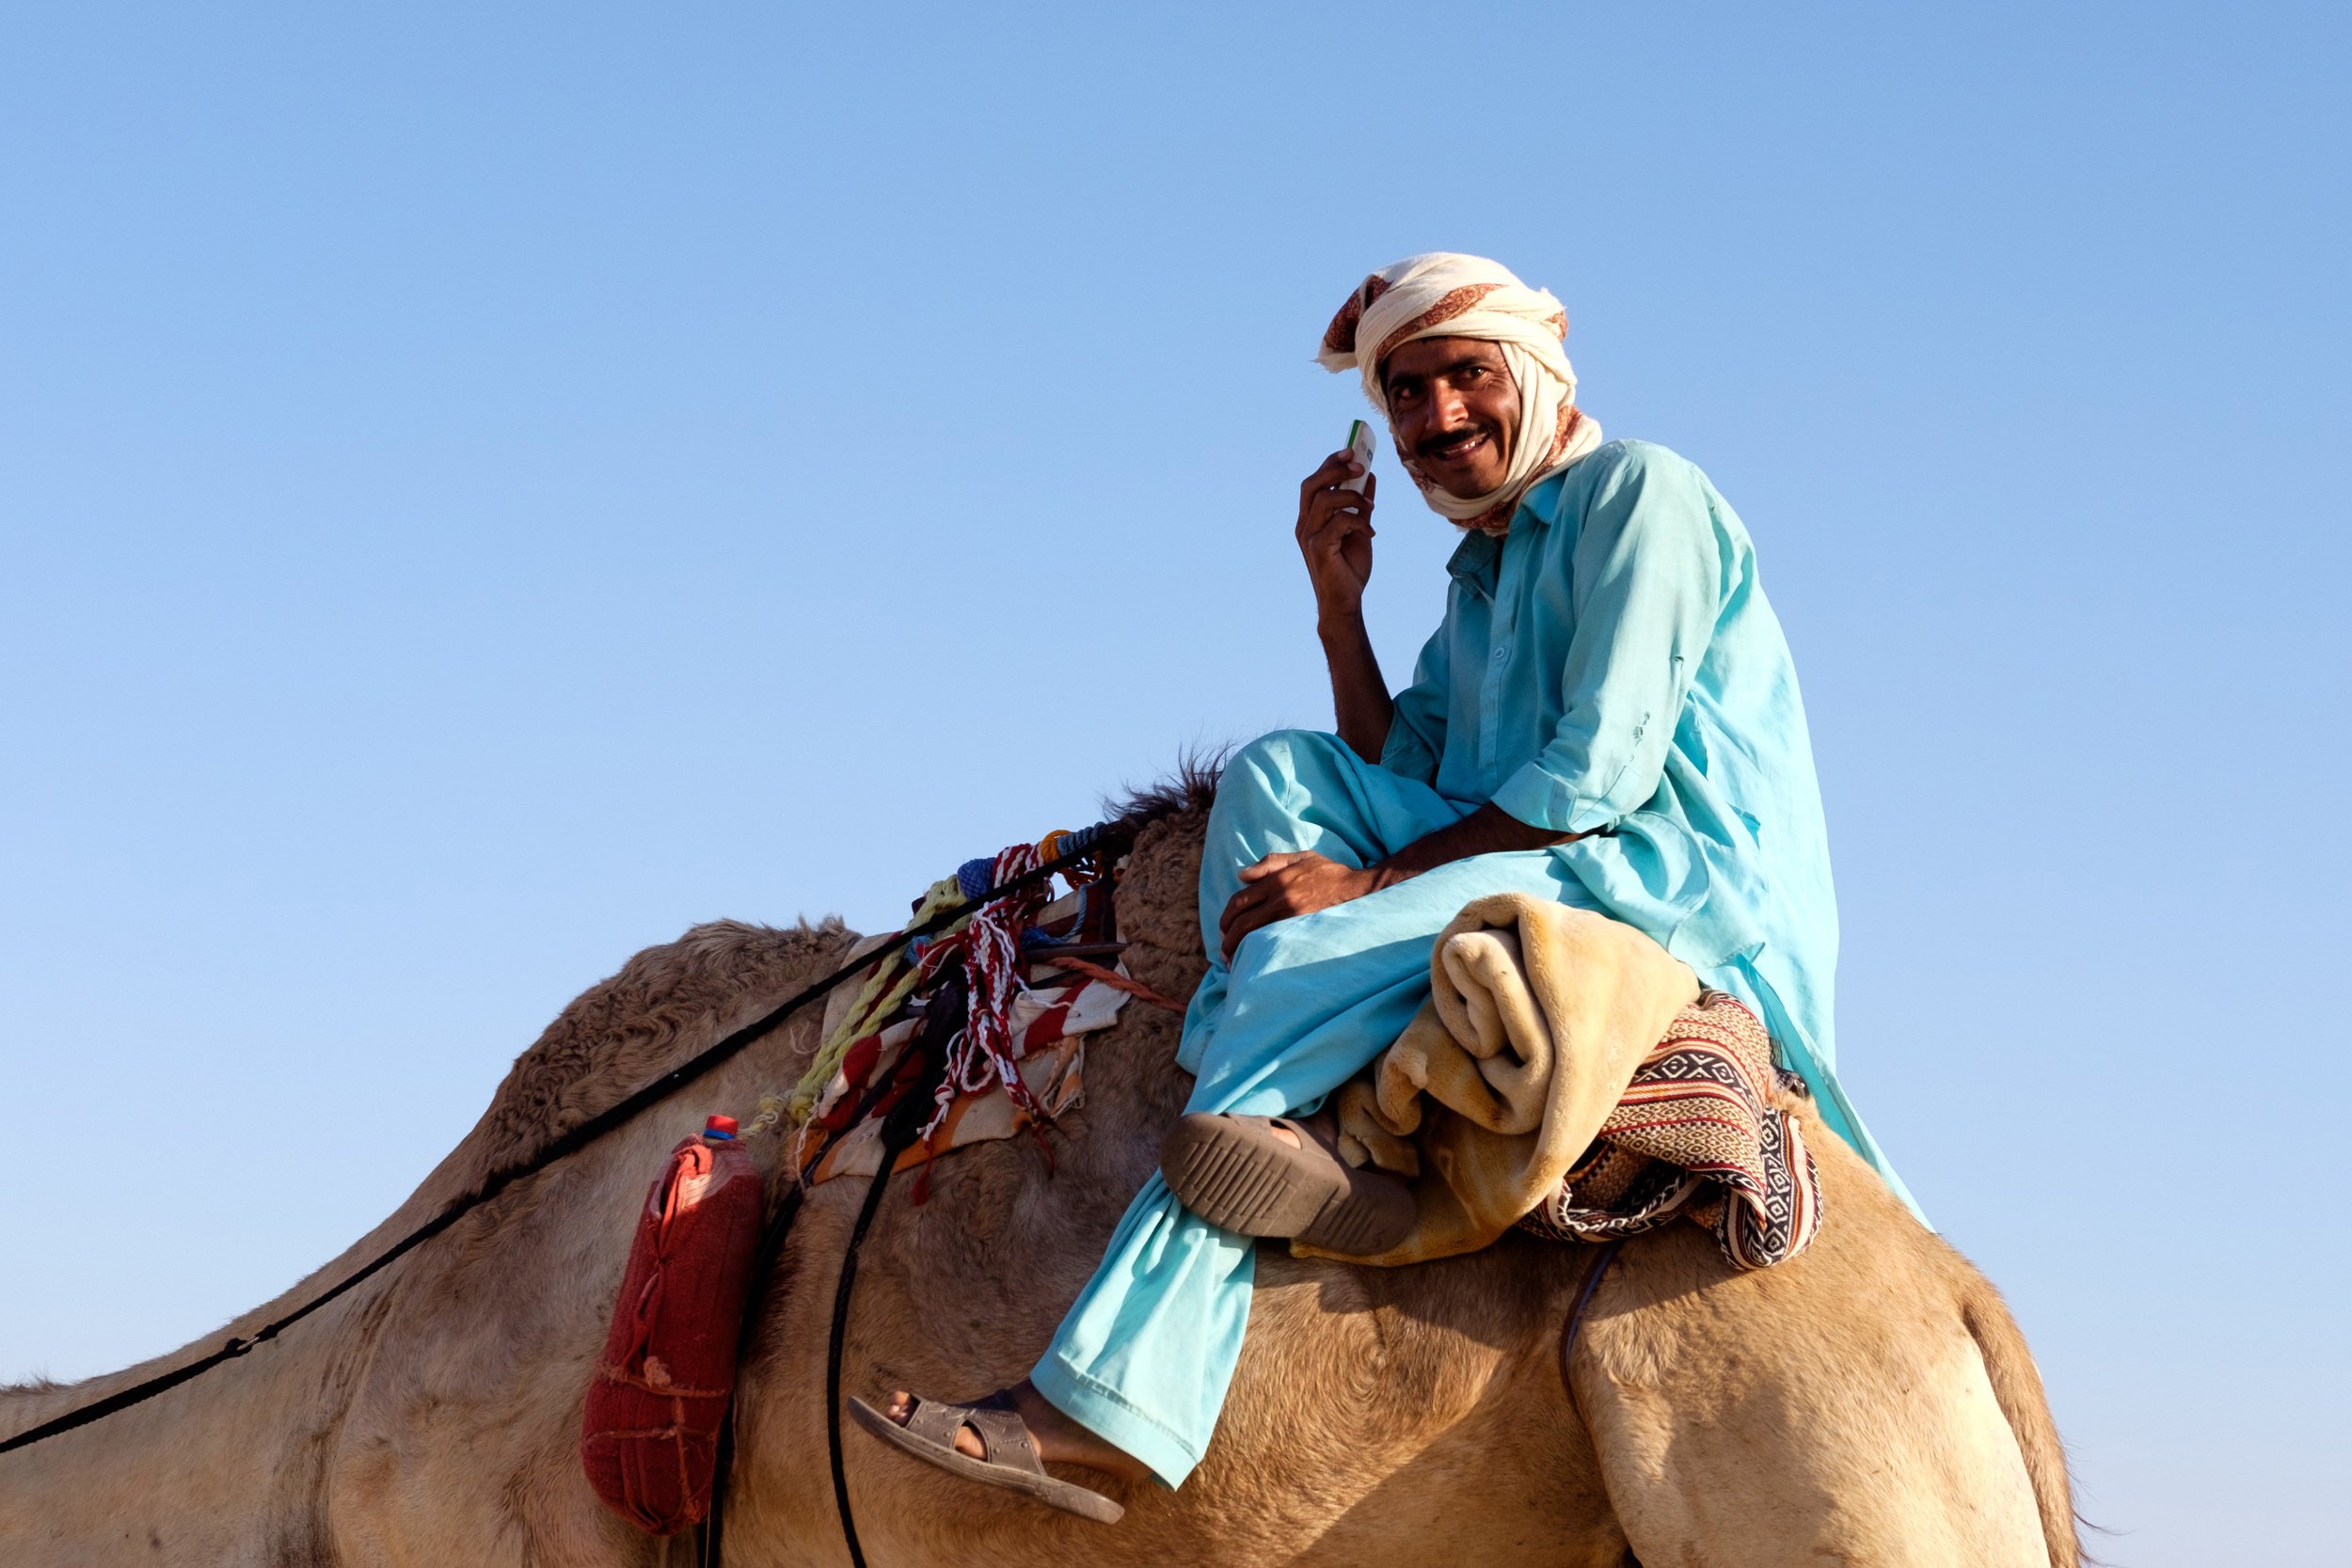 A well connected beduin with his mobile phone